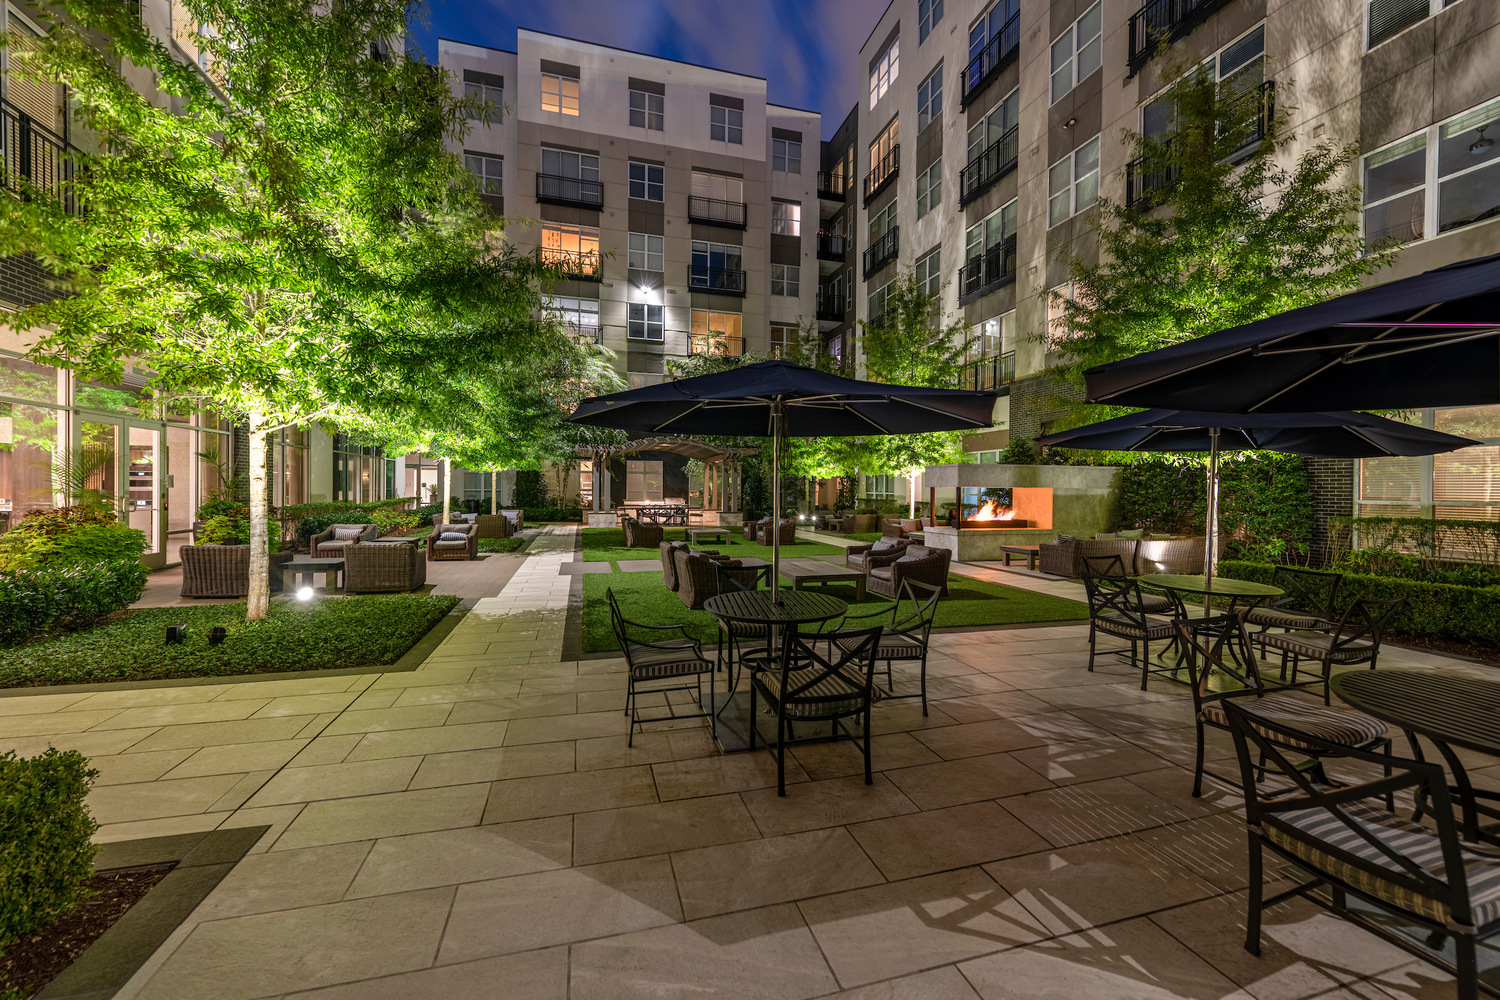 101 Cross Street : Lush landscaping, grilling and dining areas with social spaces for gathering